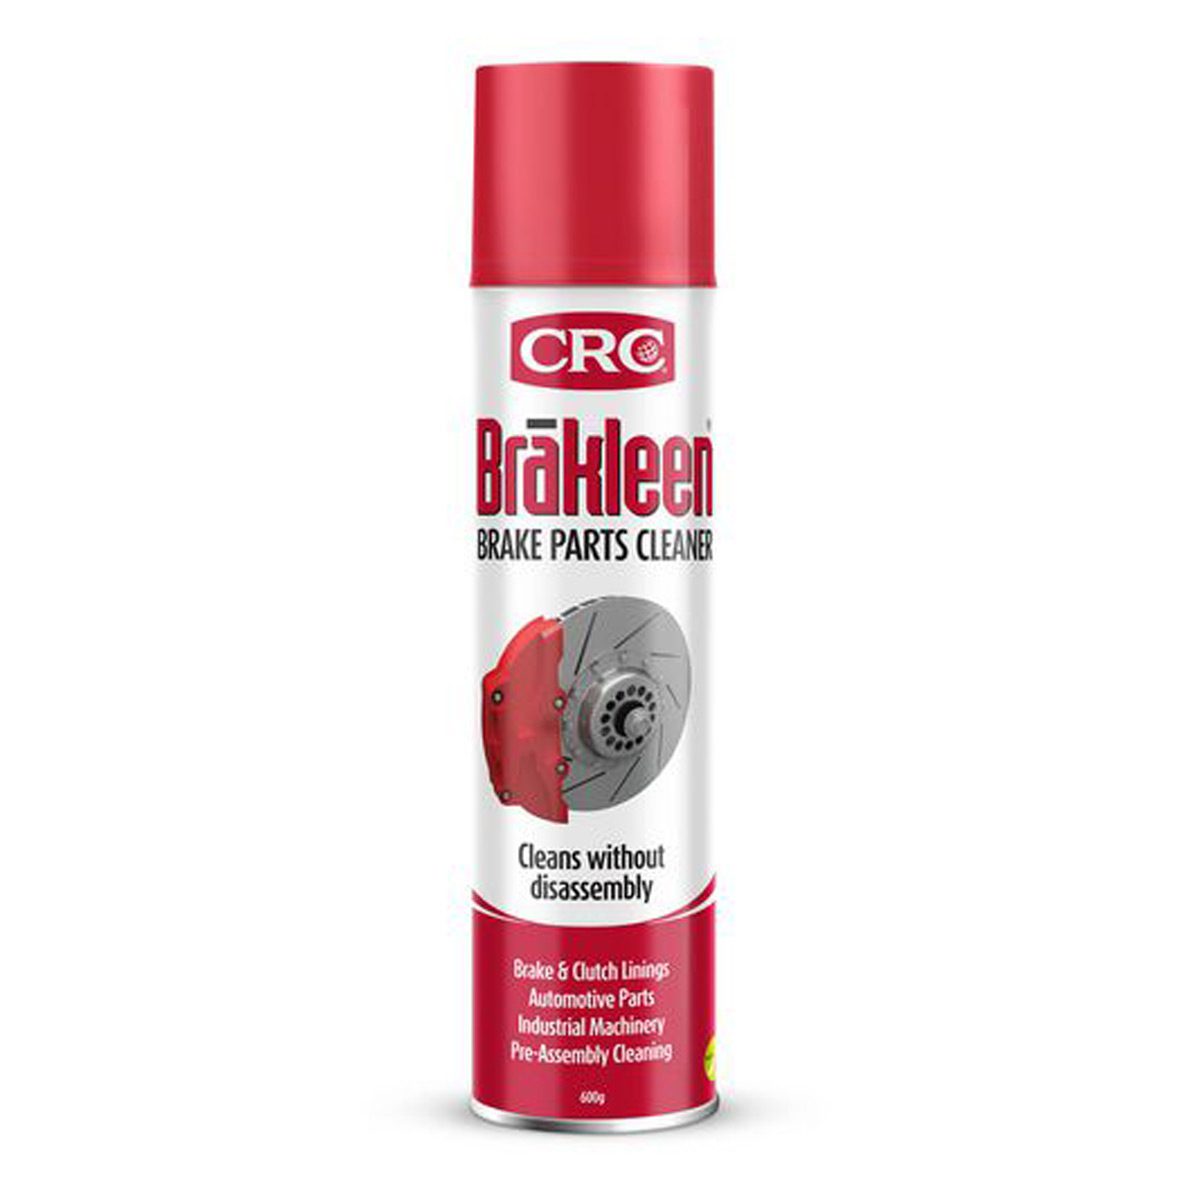 automotive-crc-brakleen-600g-powerful-heavy-duty-cleaner-degreaser-for-brake-clutch-parts-general-mechanical-equipment-vjs-distributors-C5089